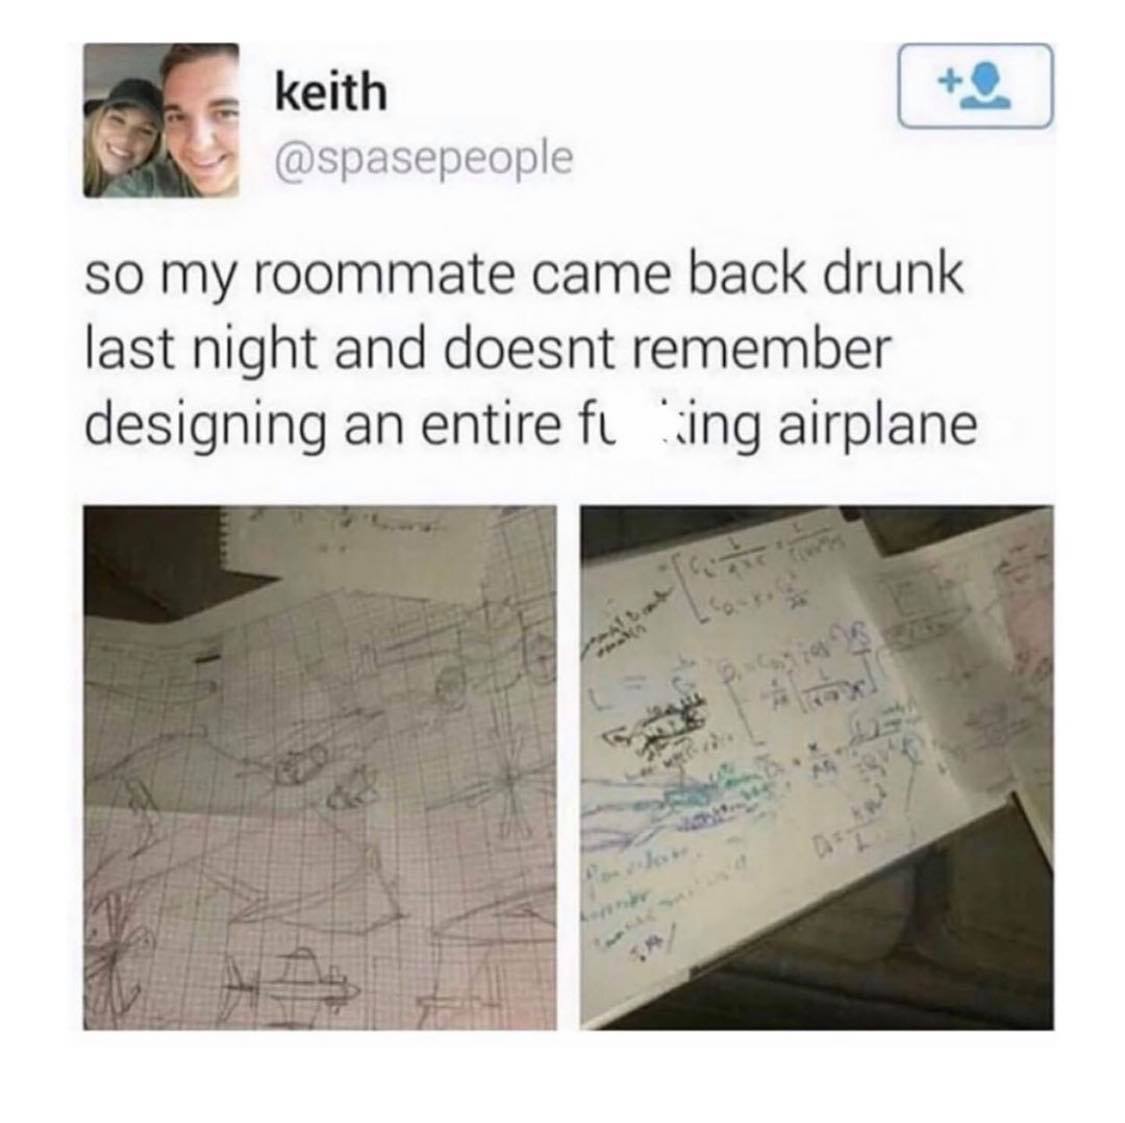 so my roommate came back drunk last night - keith so my roommate came back drunk last night and doesnt remember designing an entire fi ing airplane